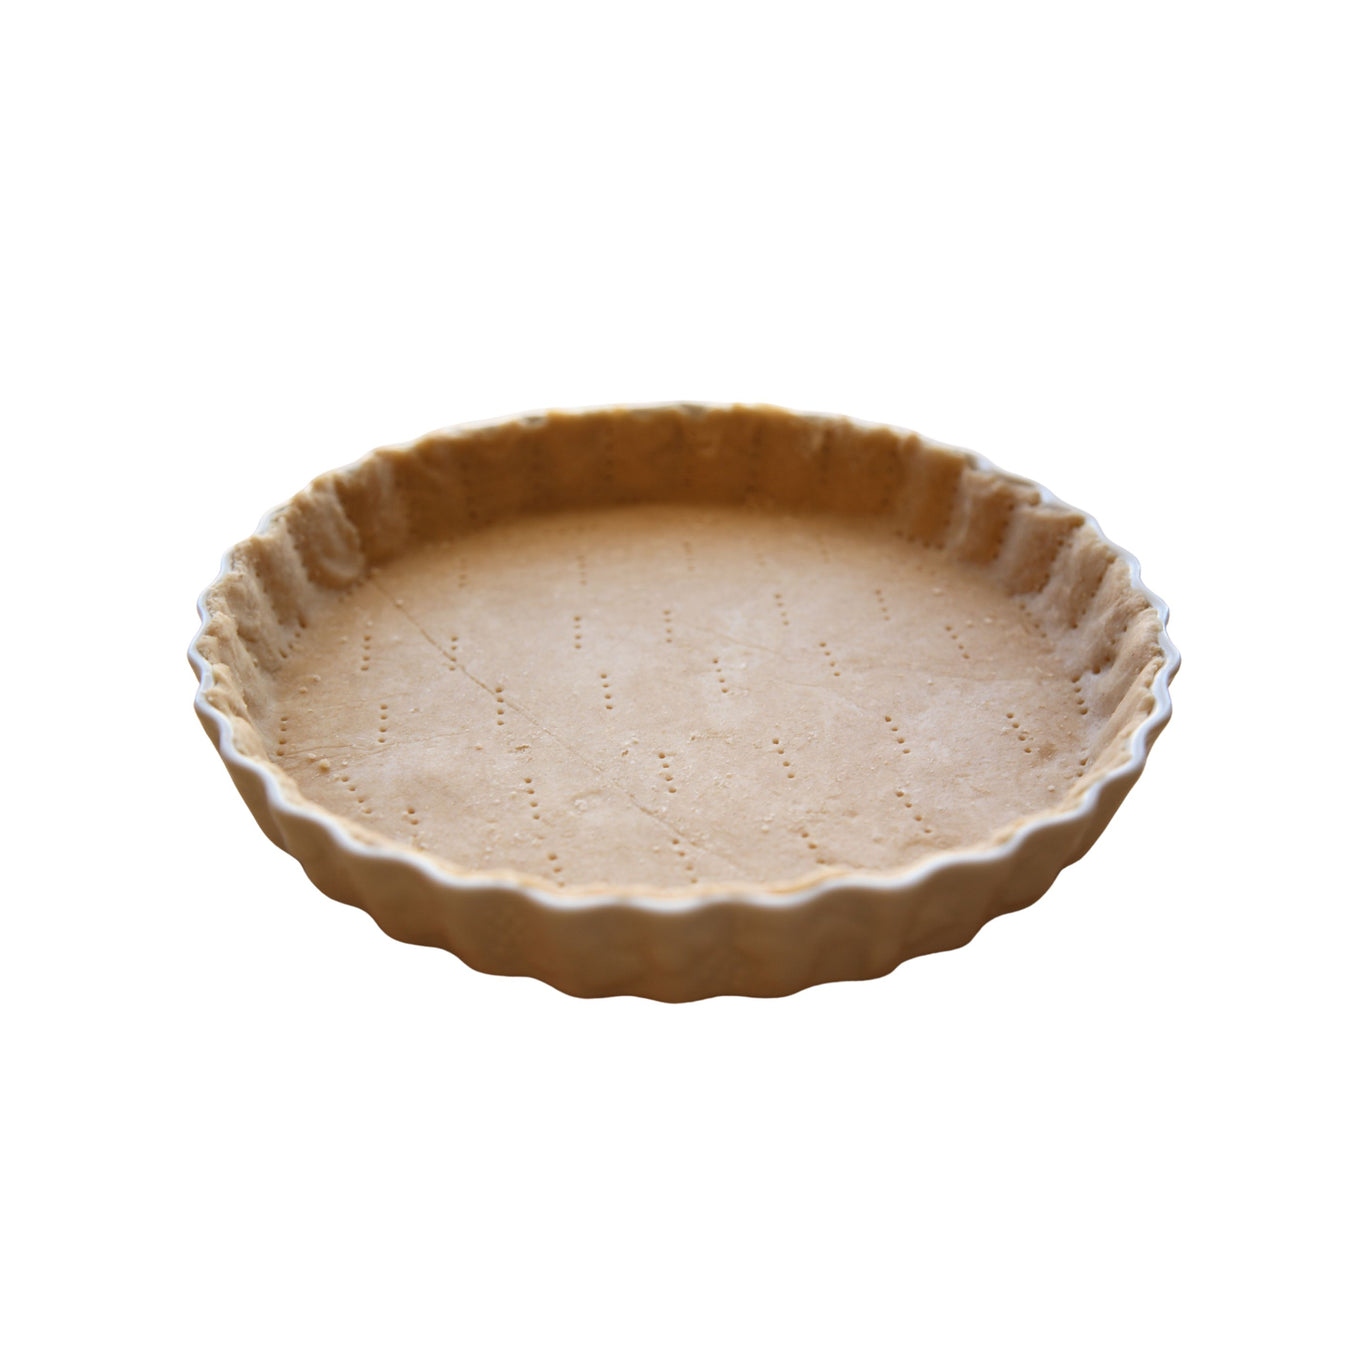 Assorted Premium Pie Crusts - Ready-to-Bake